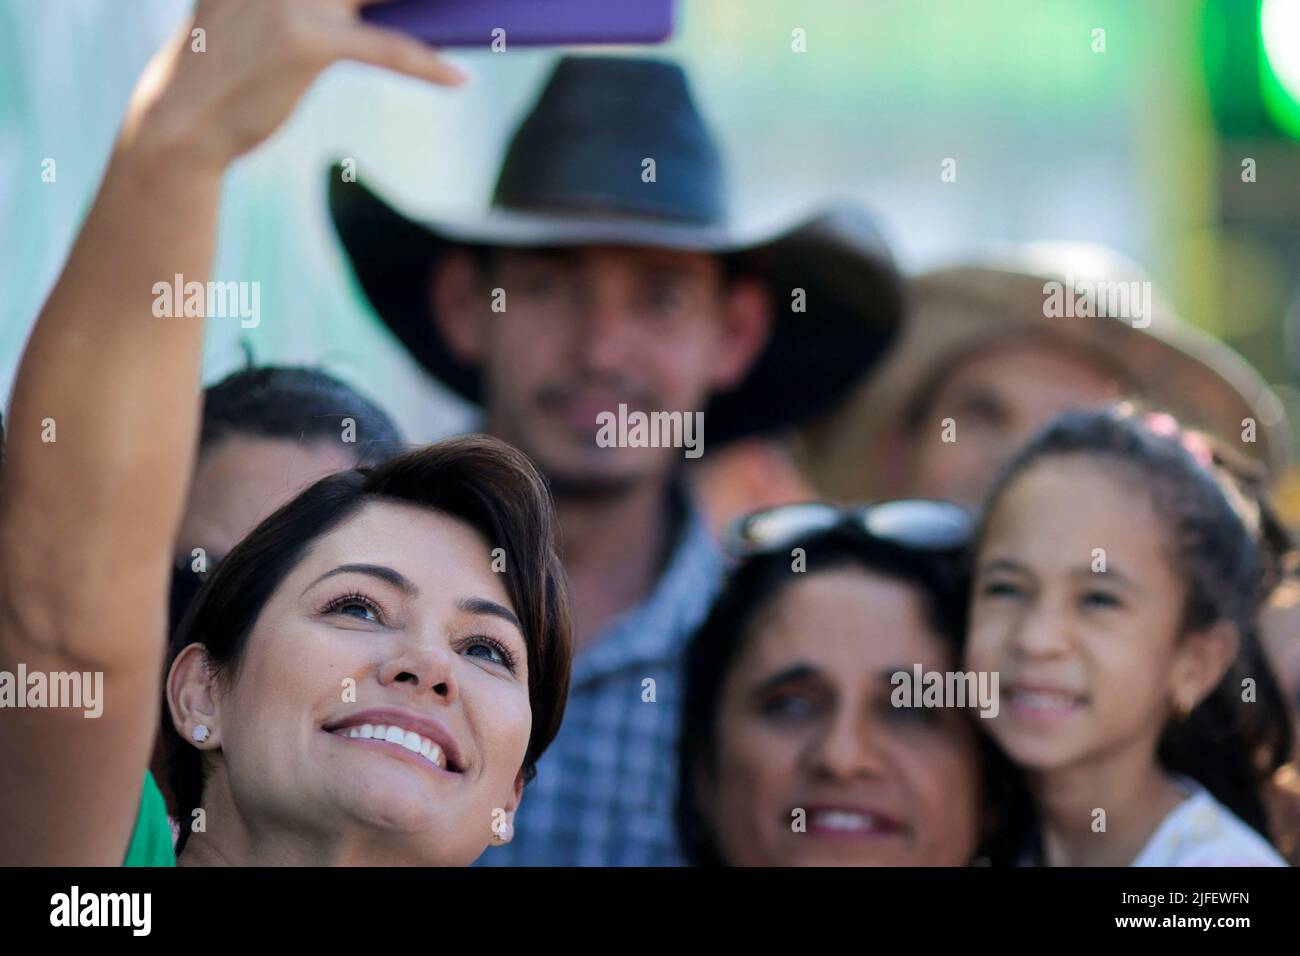 Brazilian First Lady Michelle Bolsonaro takes a photo with people during an Evangelical March for Jesus in Brasilia, Brazil July 2, 2022. REUTERS/Ueslei Marcelino Stock Photo